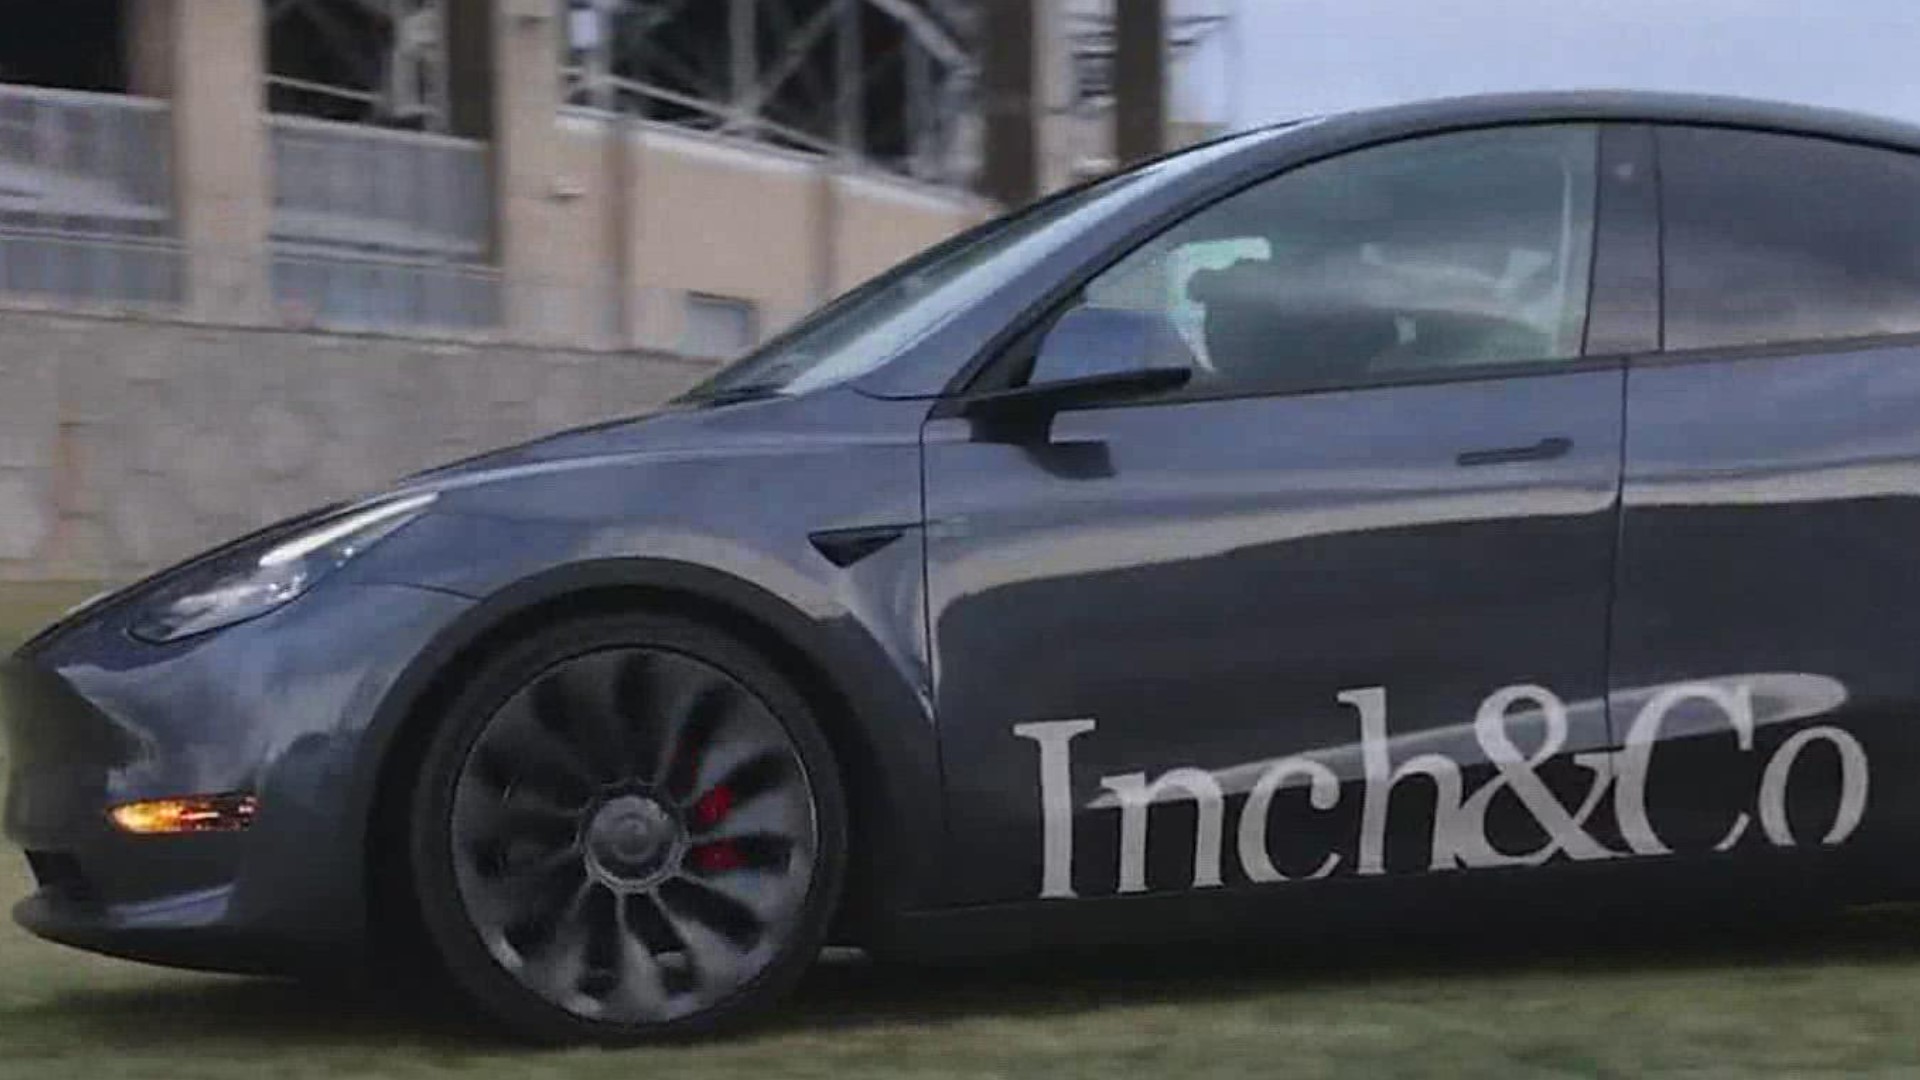 Five Penn State players have signed to receive Tesla Sedans as part of the name, image and likeness deals.